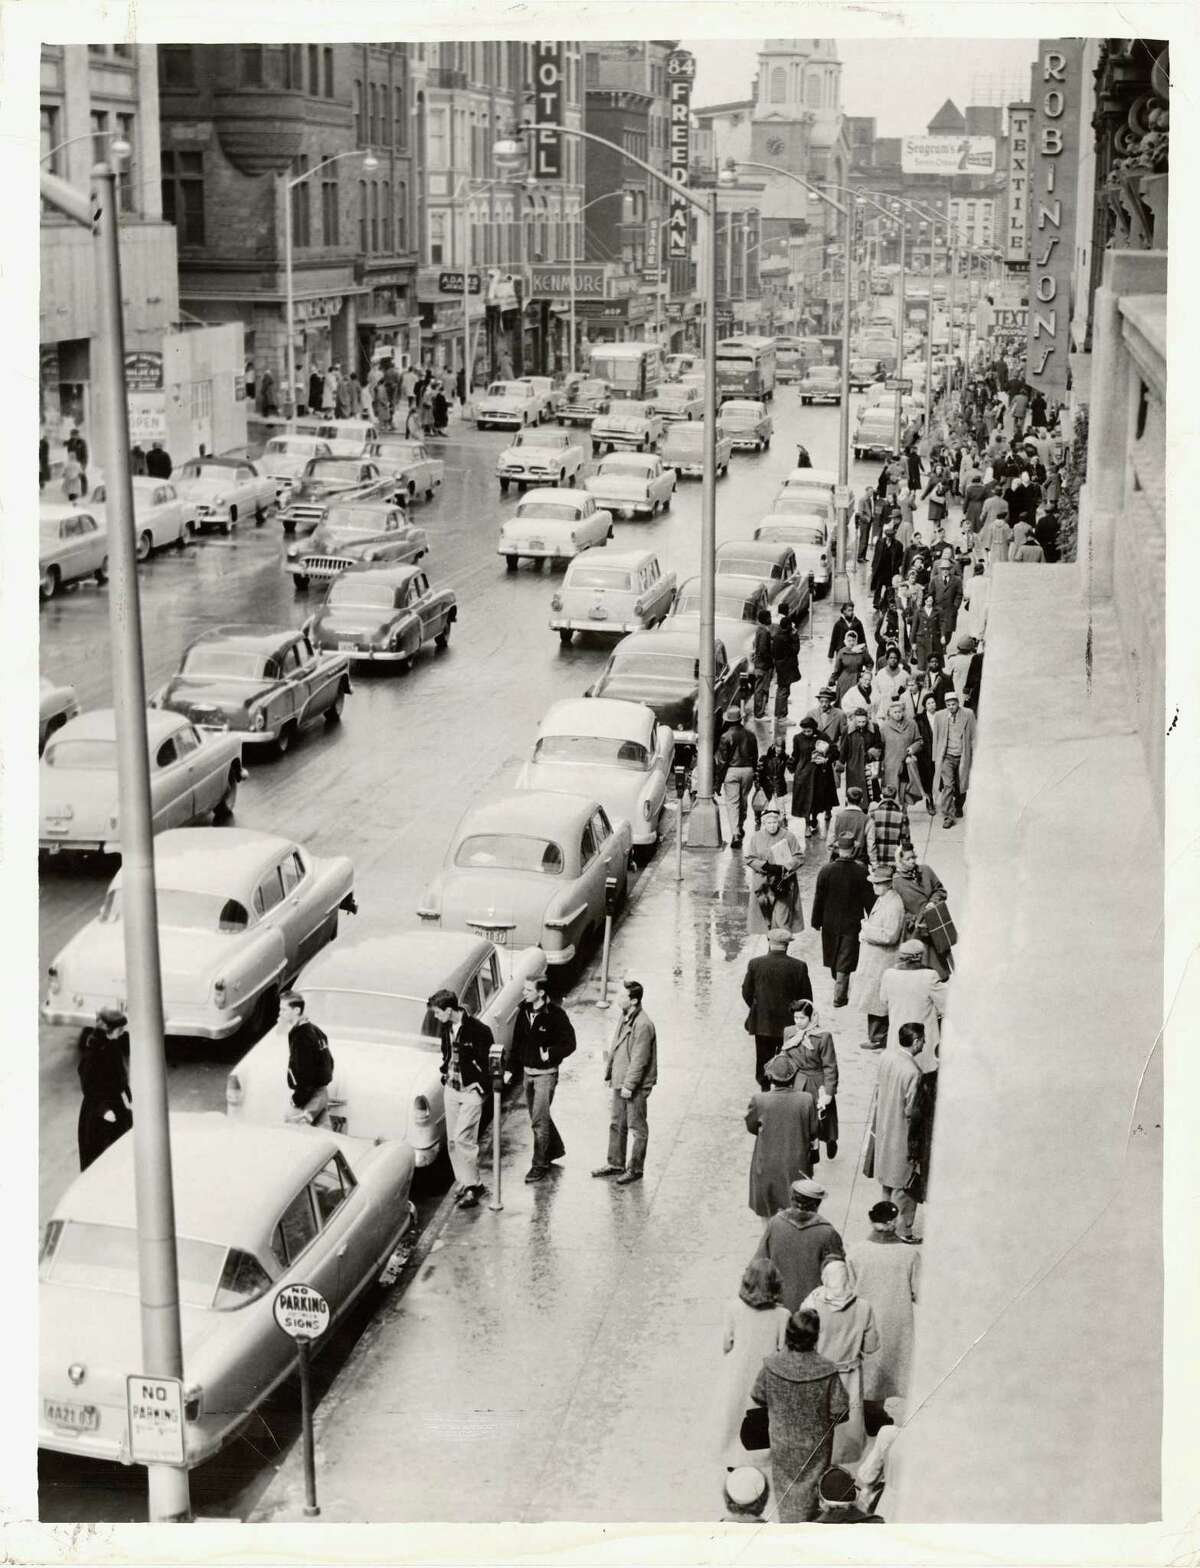 A peek at the bustling Pearl Street corridor in 1960. Pictured is the intersection between Steuben Street and North Pearl.